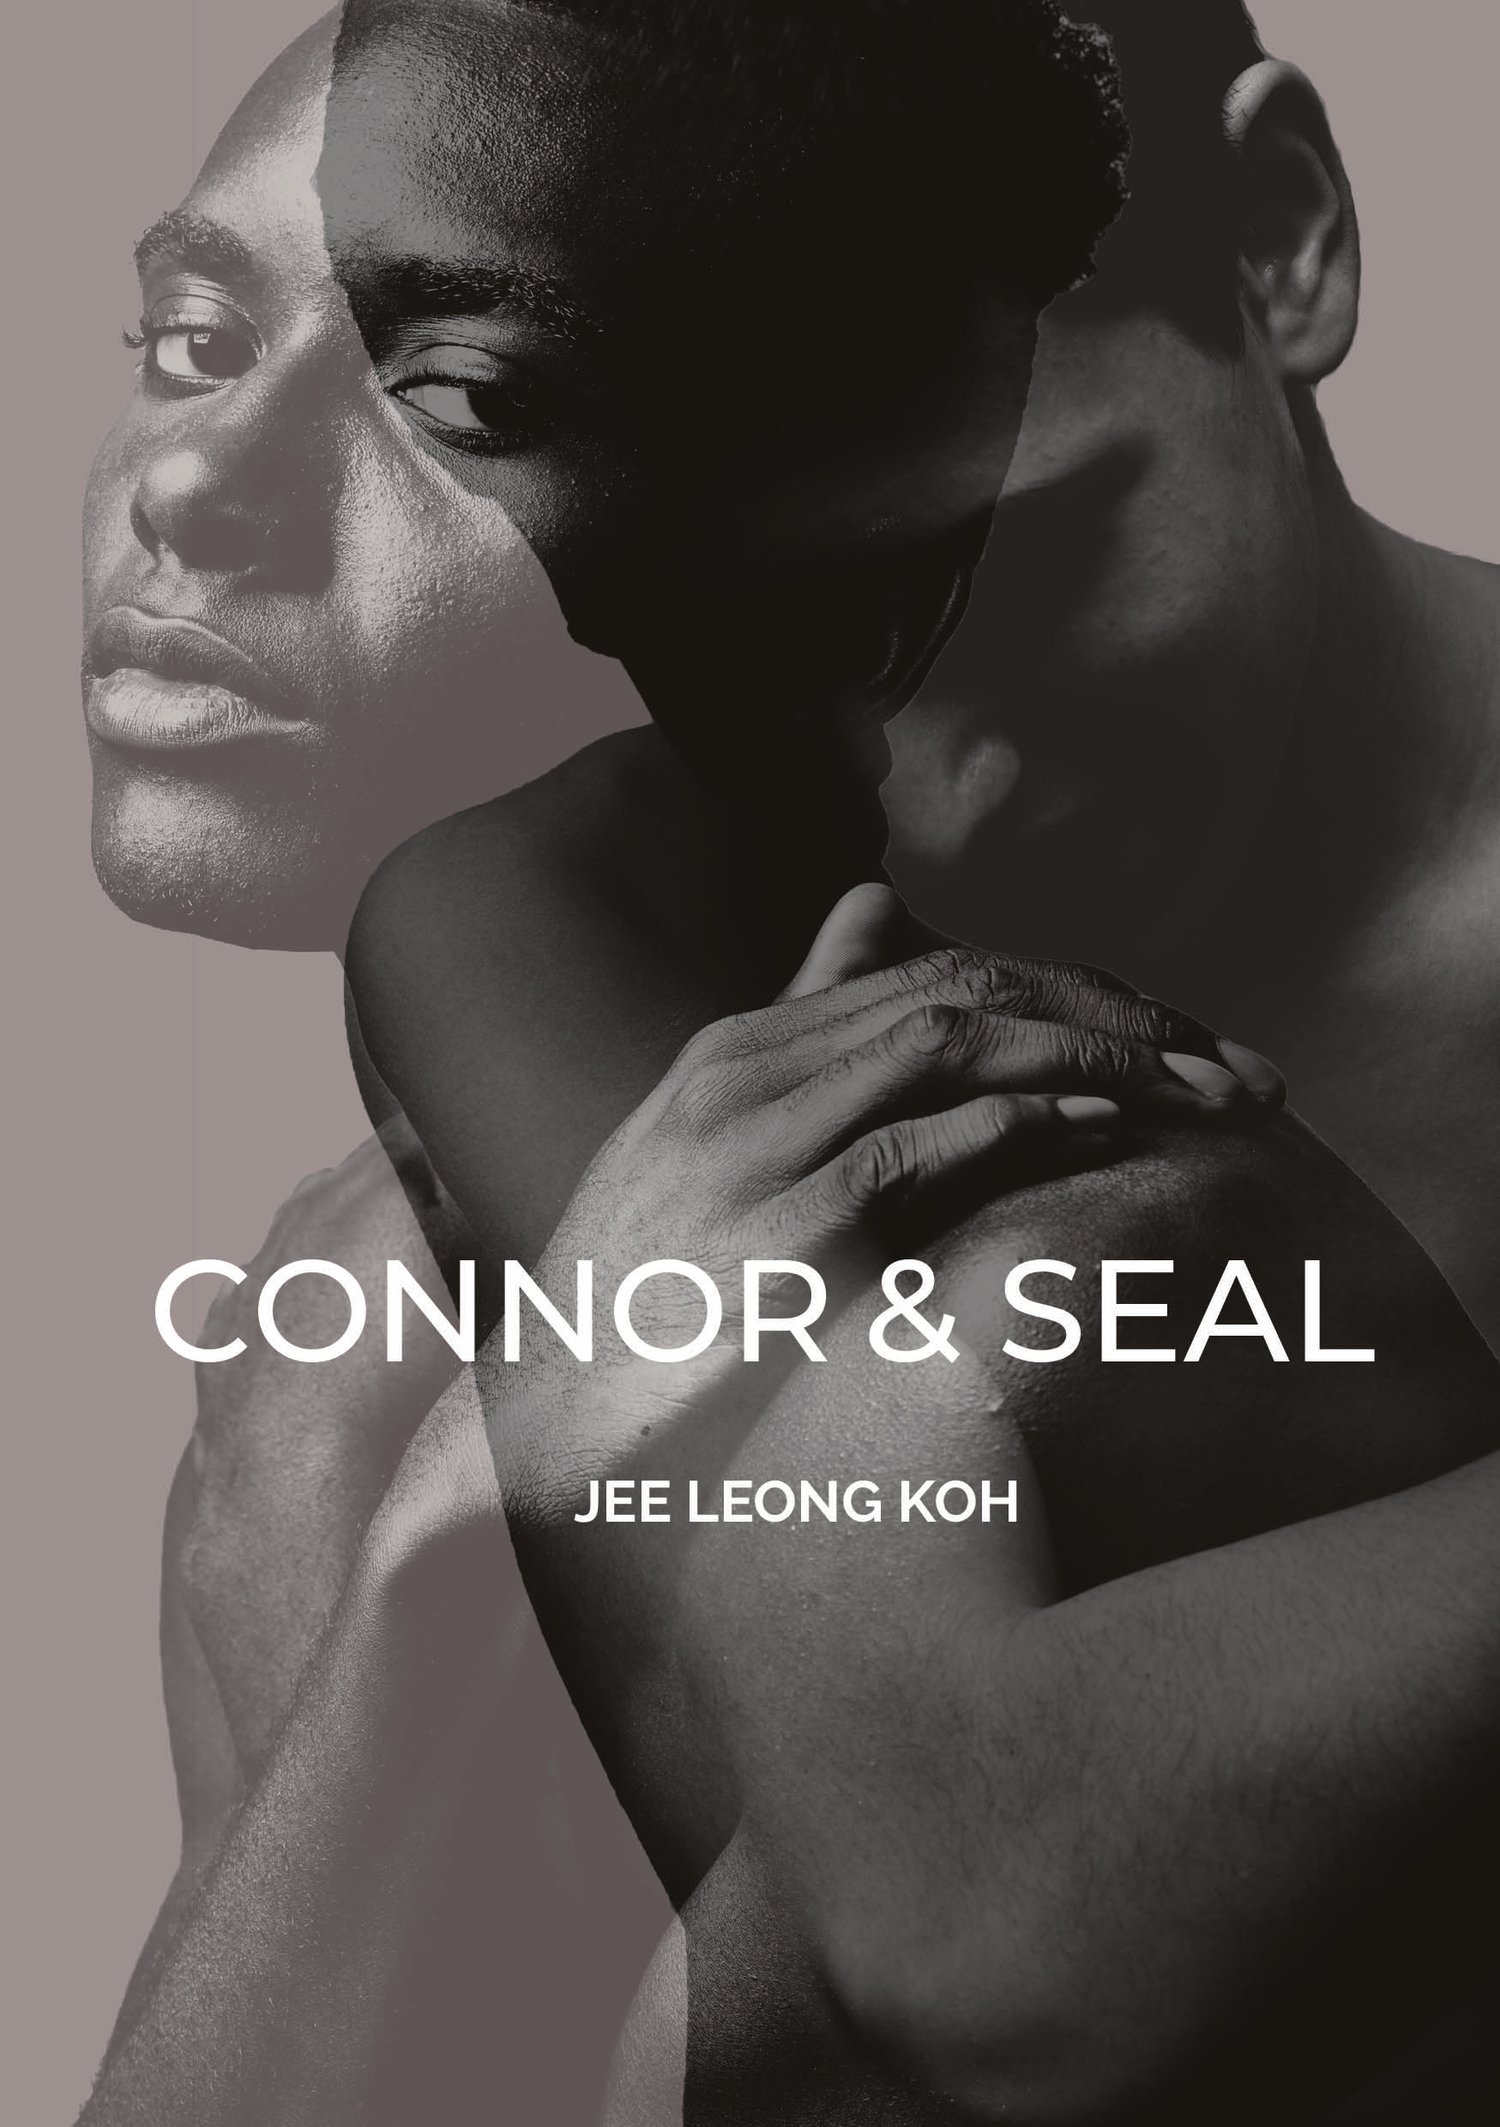 Image of Connor & Seal by Jee Leong Koh